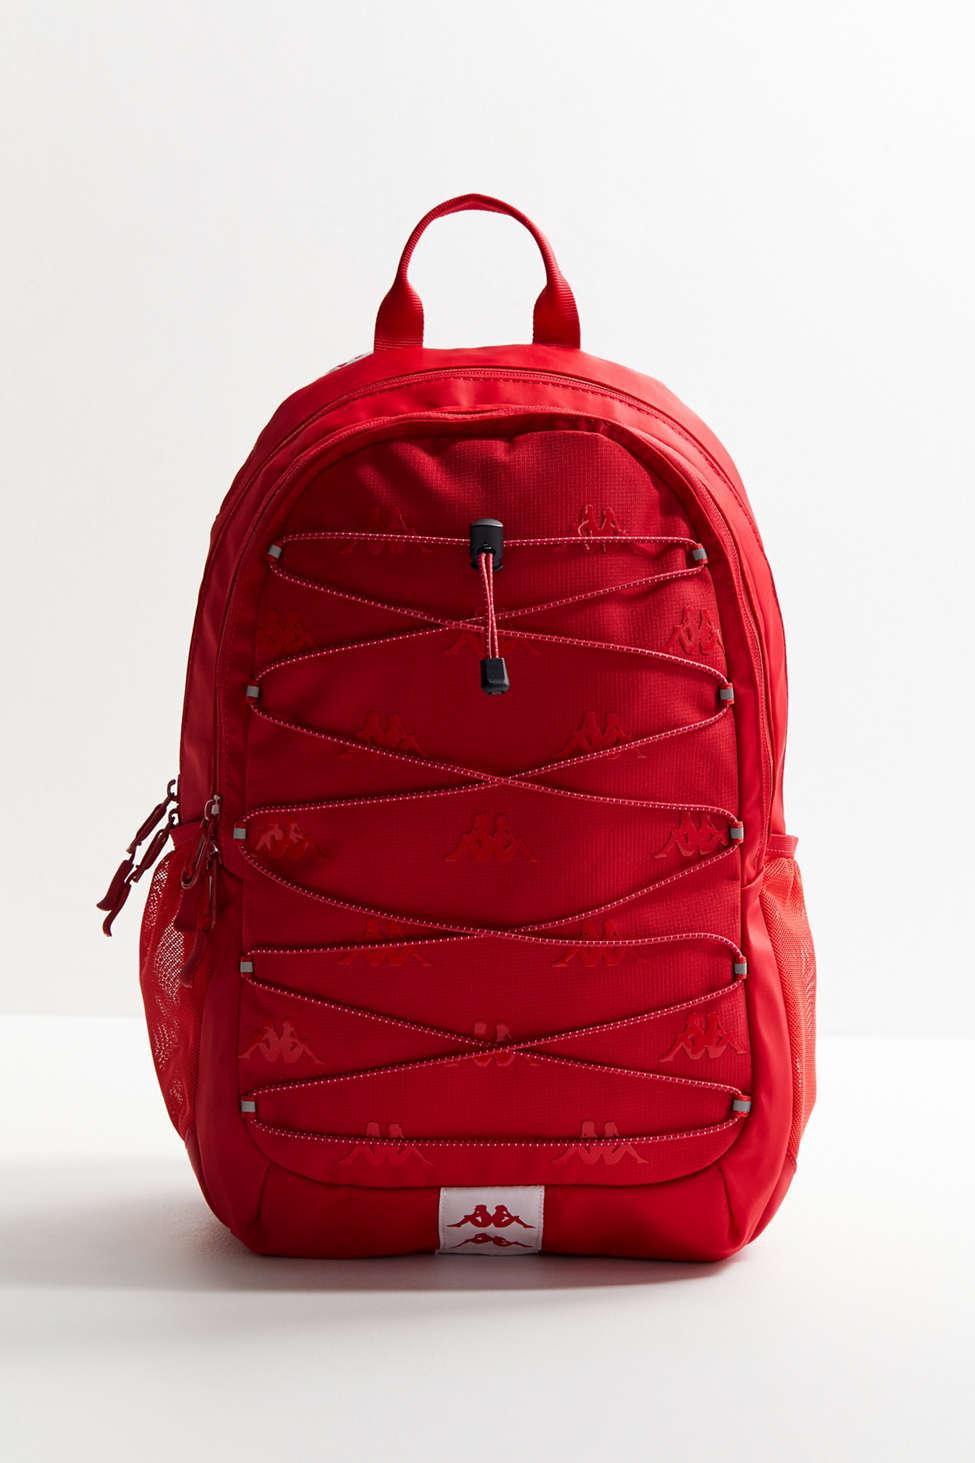 Kappa The Prmium Backpack In Dark Red And White | Lyst